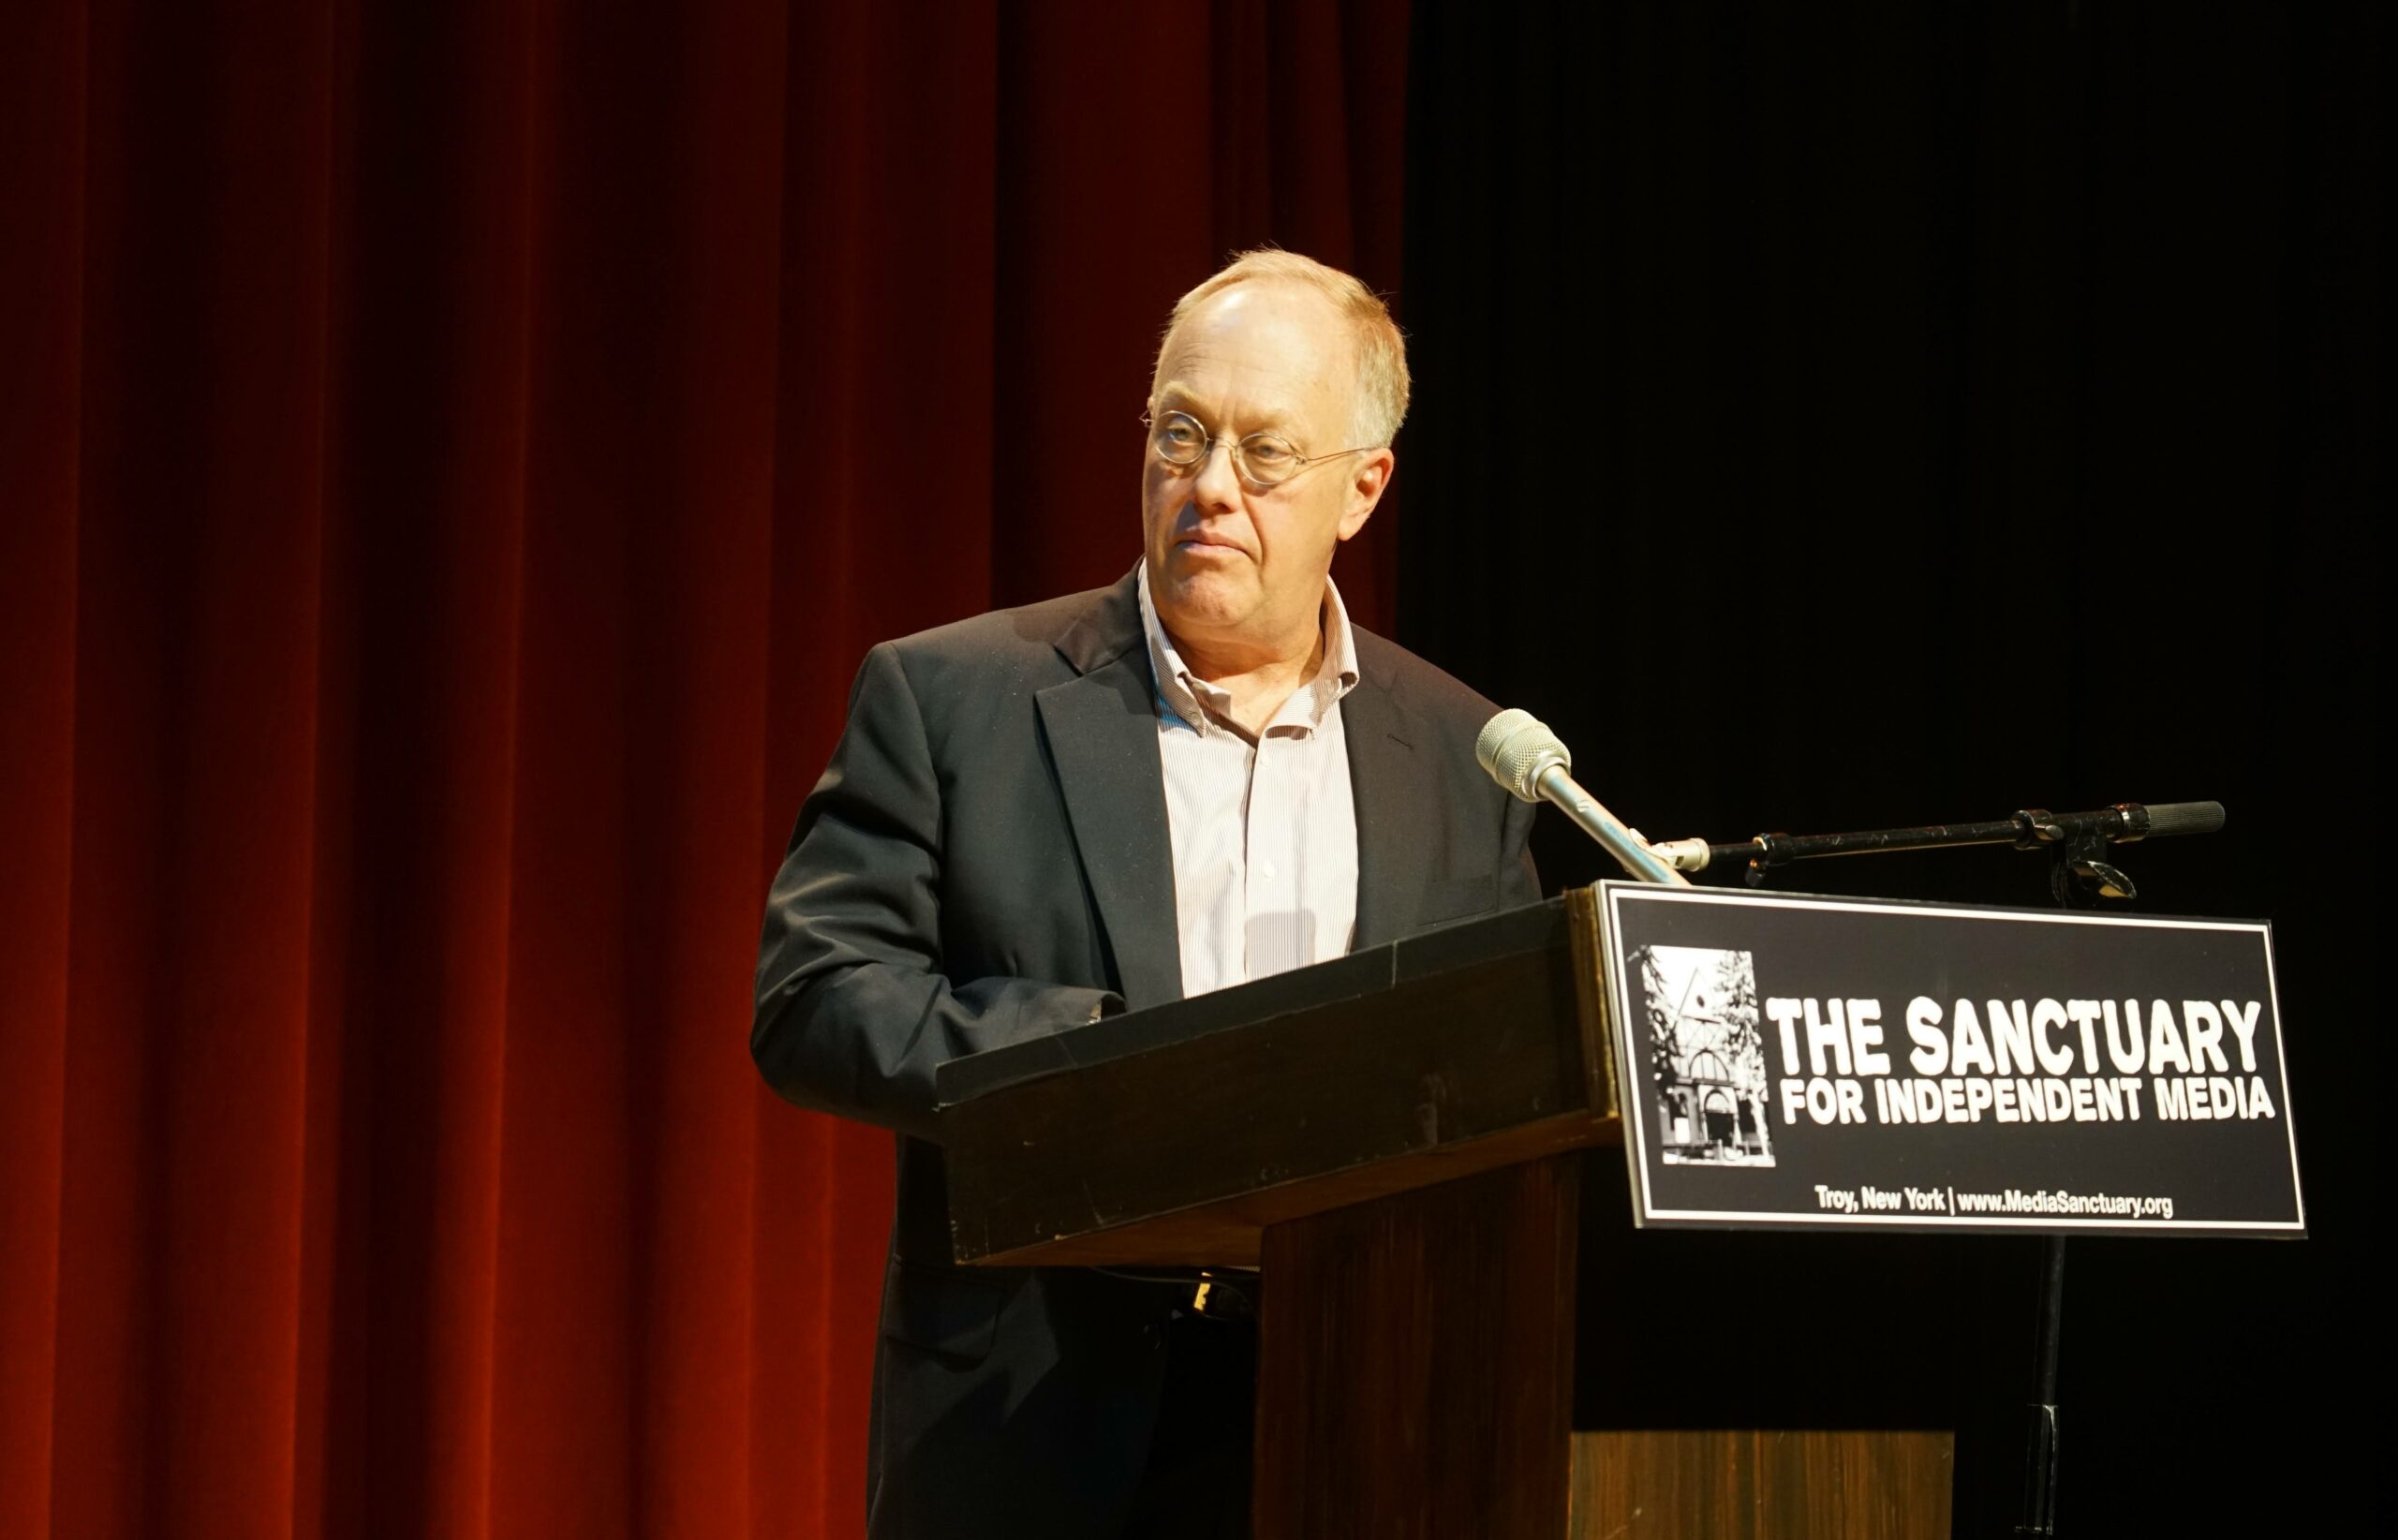 Chris Hedges speaking at The Sanctuary for Independent Media